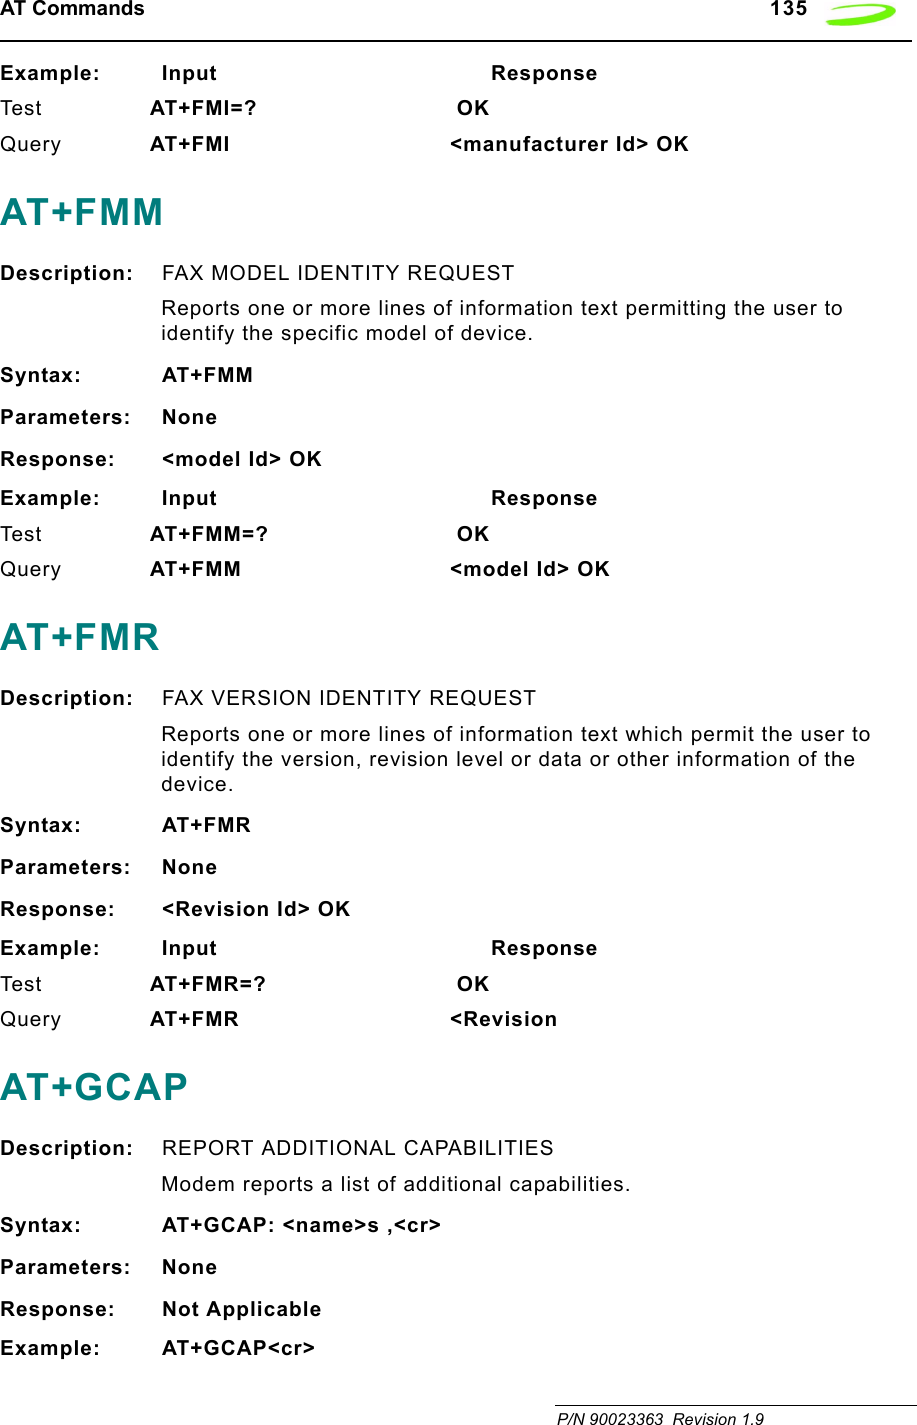 AT Commands   135 P/N 90023363  Revision 1.9Example: Input                                       ResponseTes t AT+FMI=?  OKQuery AT+FMI &lt;manufacturer Id&gt; OKAT+FMMDescription: FAX MODEL IDENTITY REQUESTReports one or more lines of information text permitting the user to identify the specific model of device.Syntax: AT+FMMParameters: NoneResponse: &lt;model Id&gt; OKExample: Input                                       ResponseTes t AT+FMM=?  OKQuery AT+FMM &lt;model Id&gt; OKAT+FMRDescription: FAX VERSION IDENTITY REQUESTReports one or more lines of information text which permit the user to identify the version, revision level or data or other information of the device.Syntax: AT+FMRParameters: NoneResponse: &lt;Revision Id&gt; OKExample: Input                                       ResponseTes t AT+FMR=?  OKQuery AT+FMR &lt;RevisionAT+GCAPDescription: REPORT ADDITIONAL CAPABILITIESModem reports a list of additional capabilities.Syntax: AT+GCAP: &lt;name&gt;s ,&lt;cr&gt;Parameters: NoneResponse: Not ApplicableExample: AT+GCAP&lt;cr&gt;